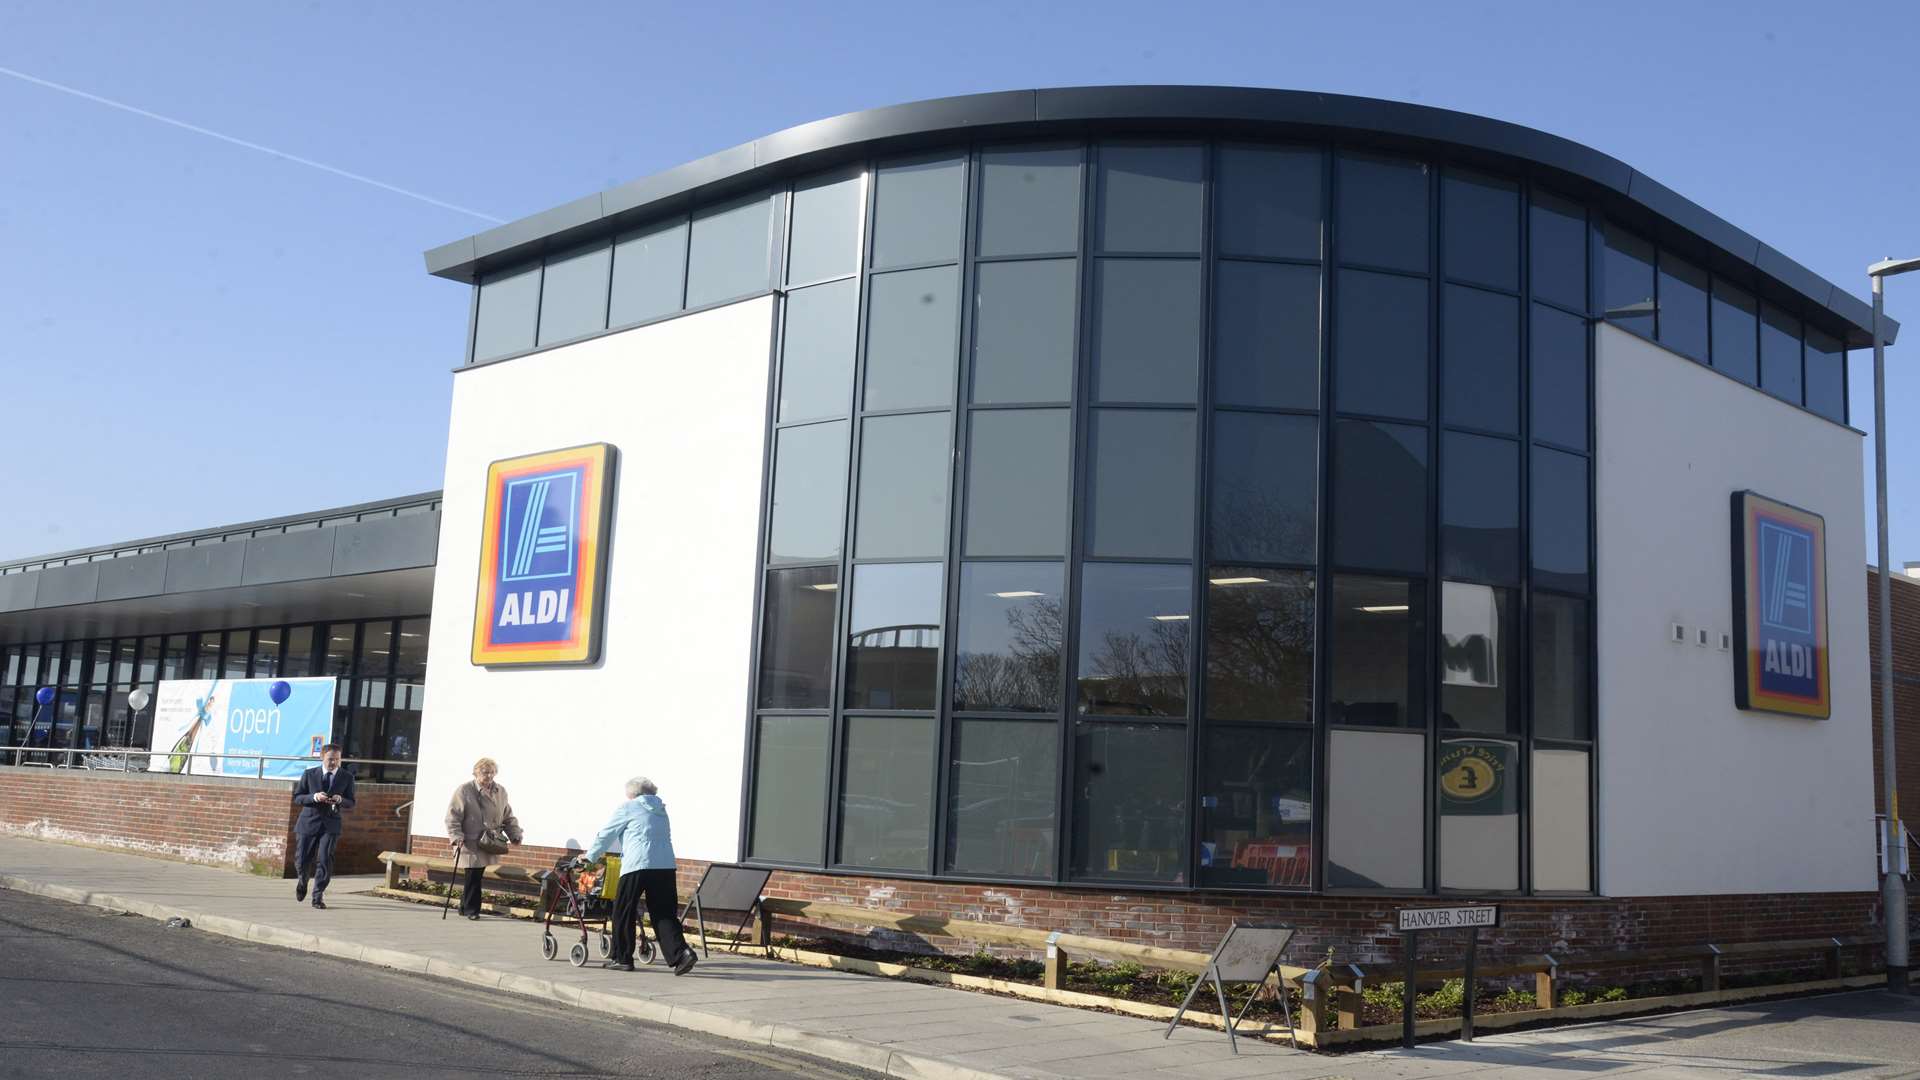 The new Herne Bay Aldi has proved a success, say developers